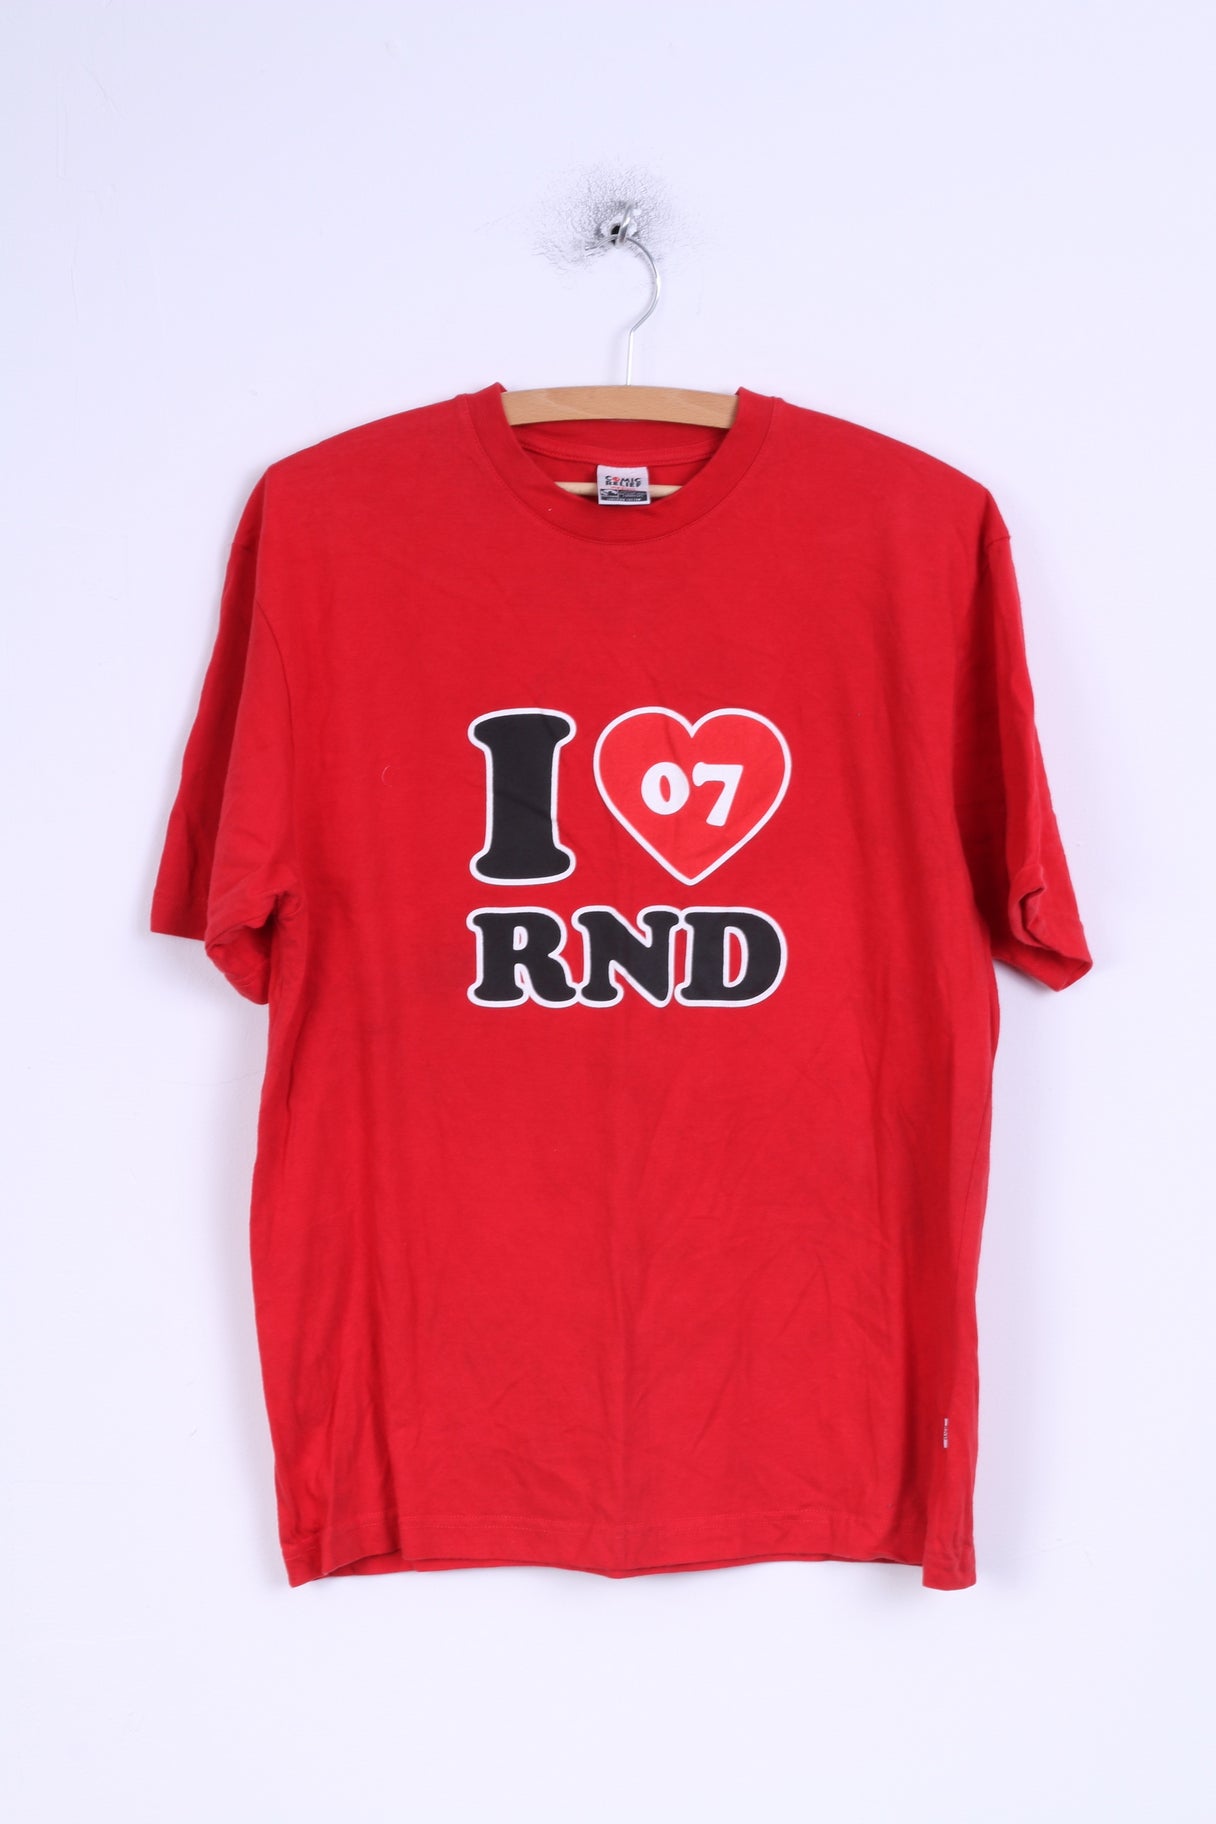 Comic Relief Mens M T-Shirt Red Nose Day I Love RND 2007 Cotton